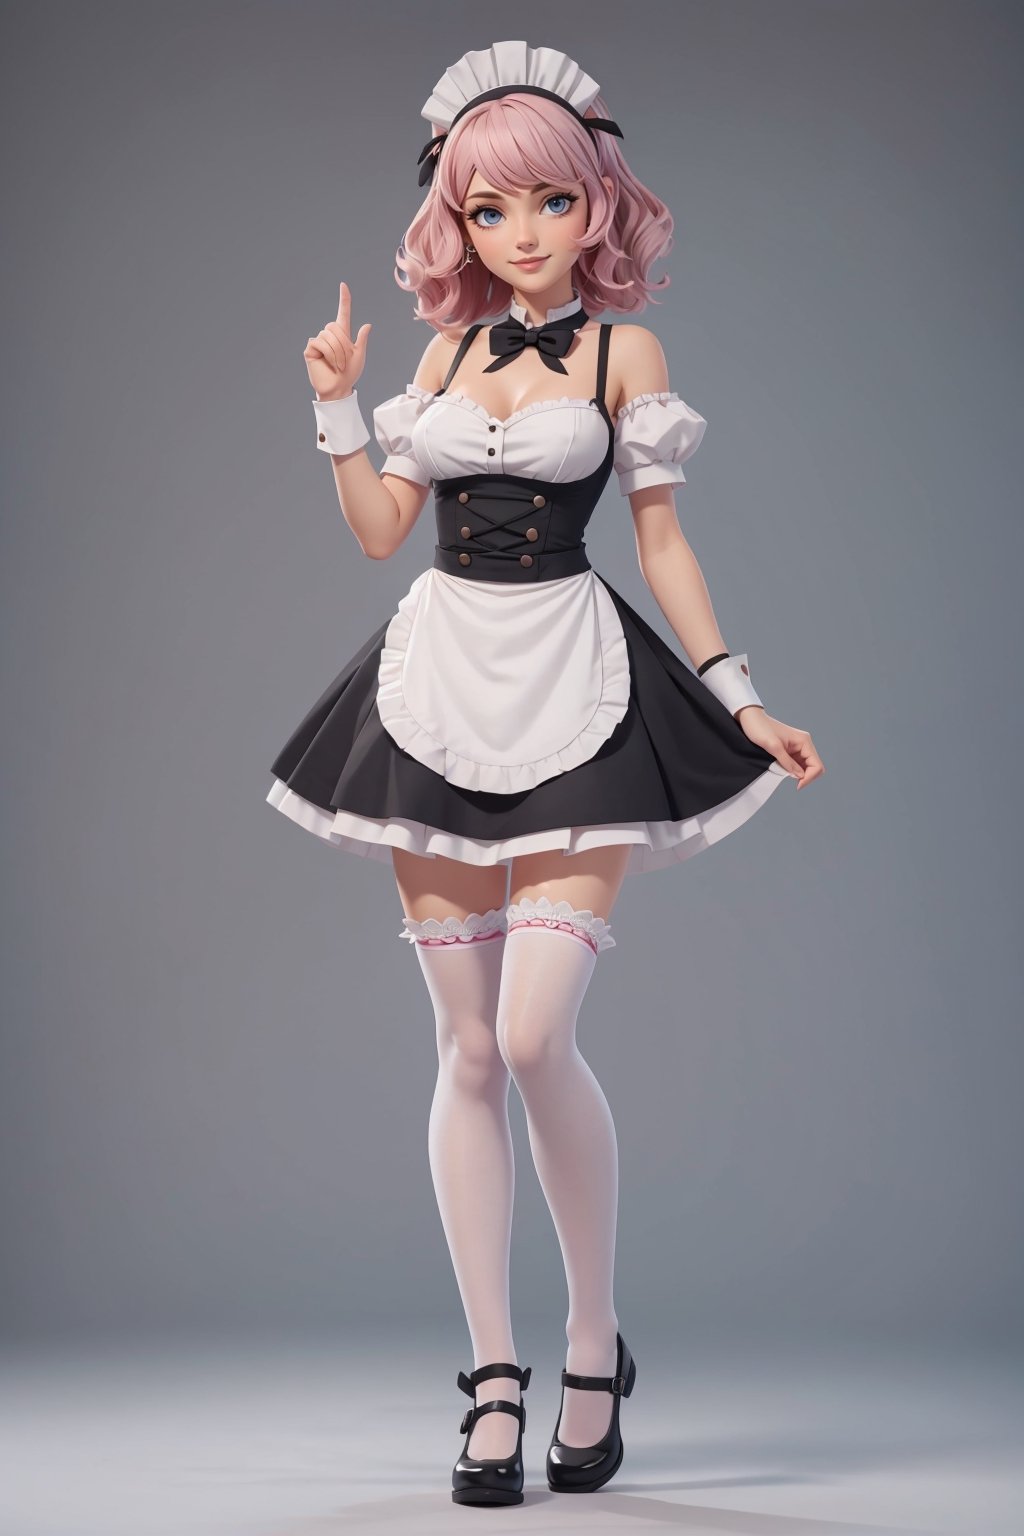 character sheet,beautiful, good hands, full body, good body, 18 year old girl body,sexy pose, full_body,character_sheet, shoulder length fluffy semi wavy hair, pink hair,maid clothes, white stockings, greeting pose,maid black shoes, body with good geometry